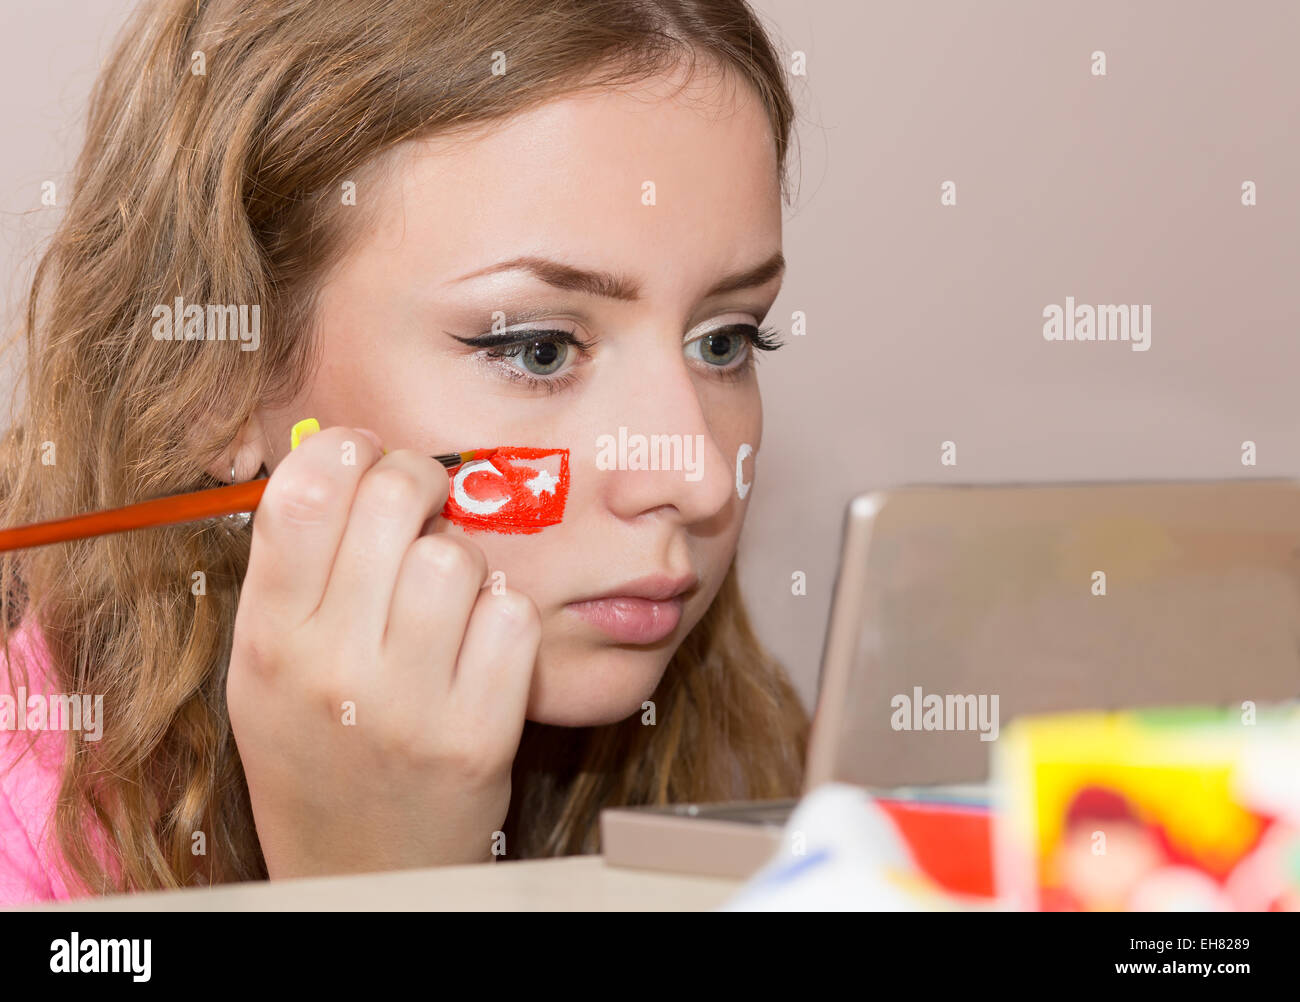 Young female making up her face with Turkish flag Stock Photo